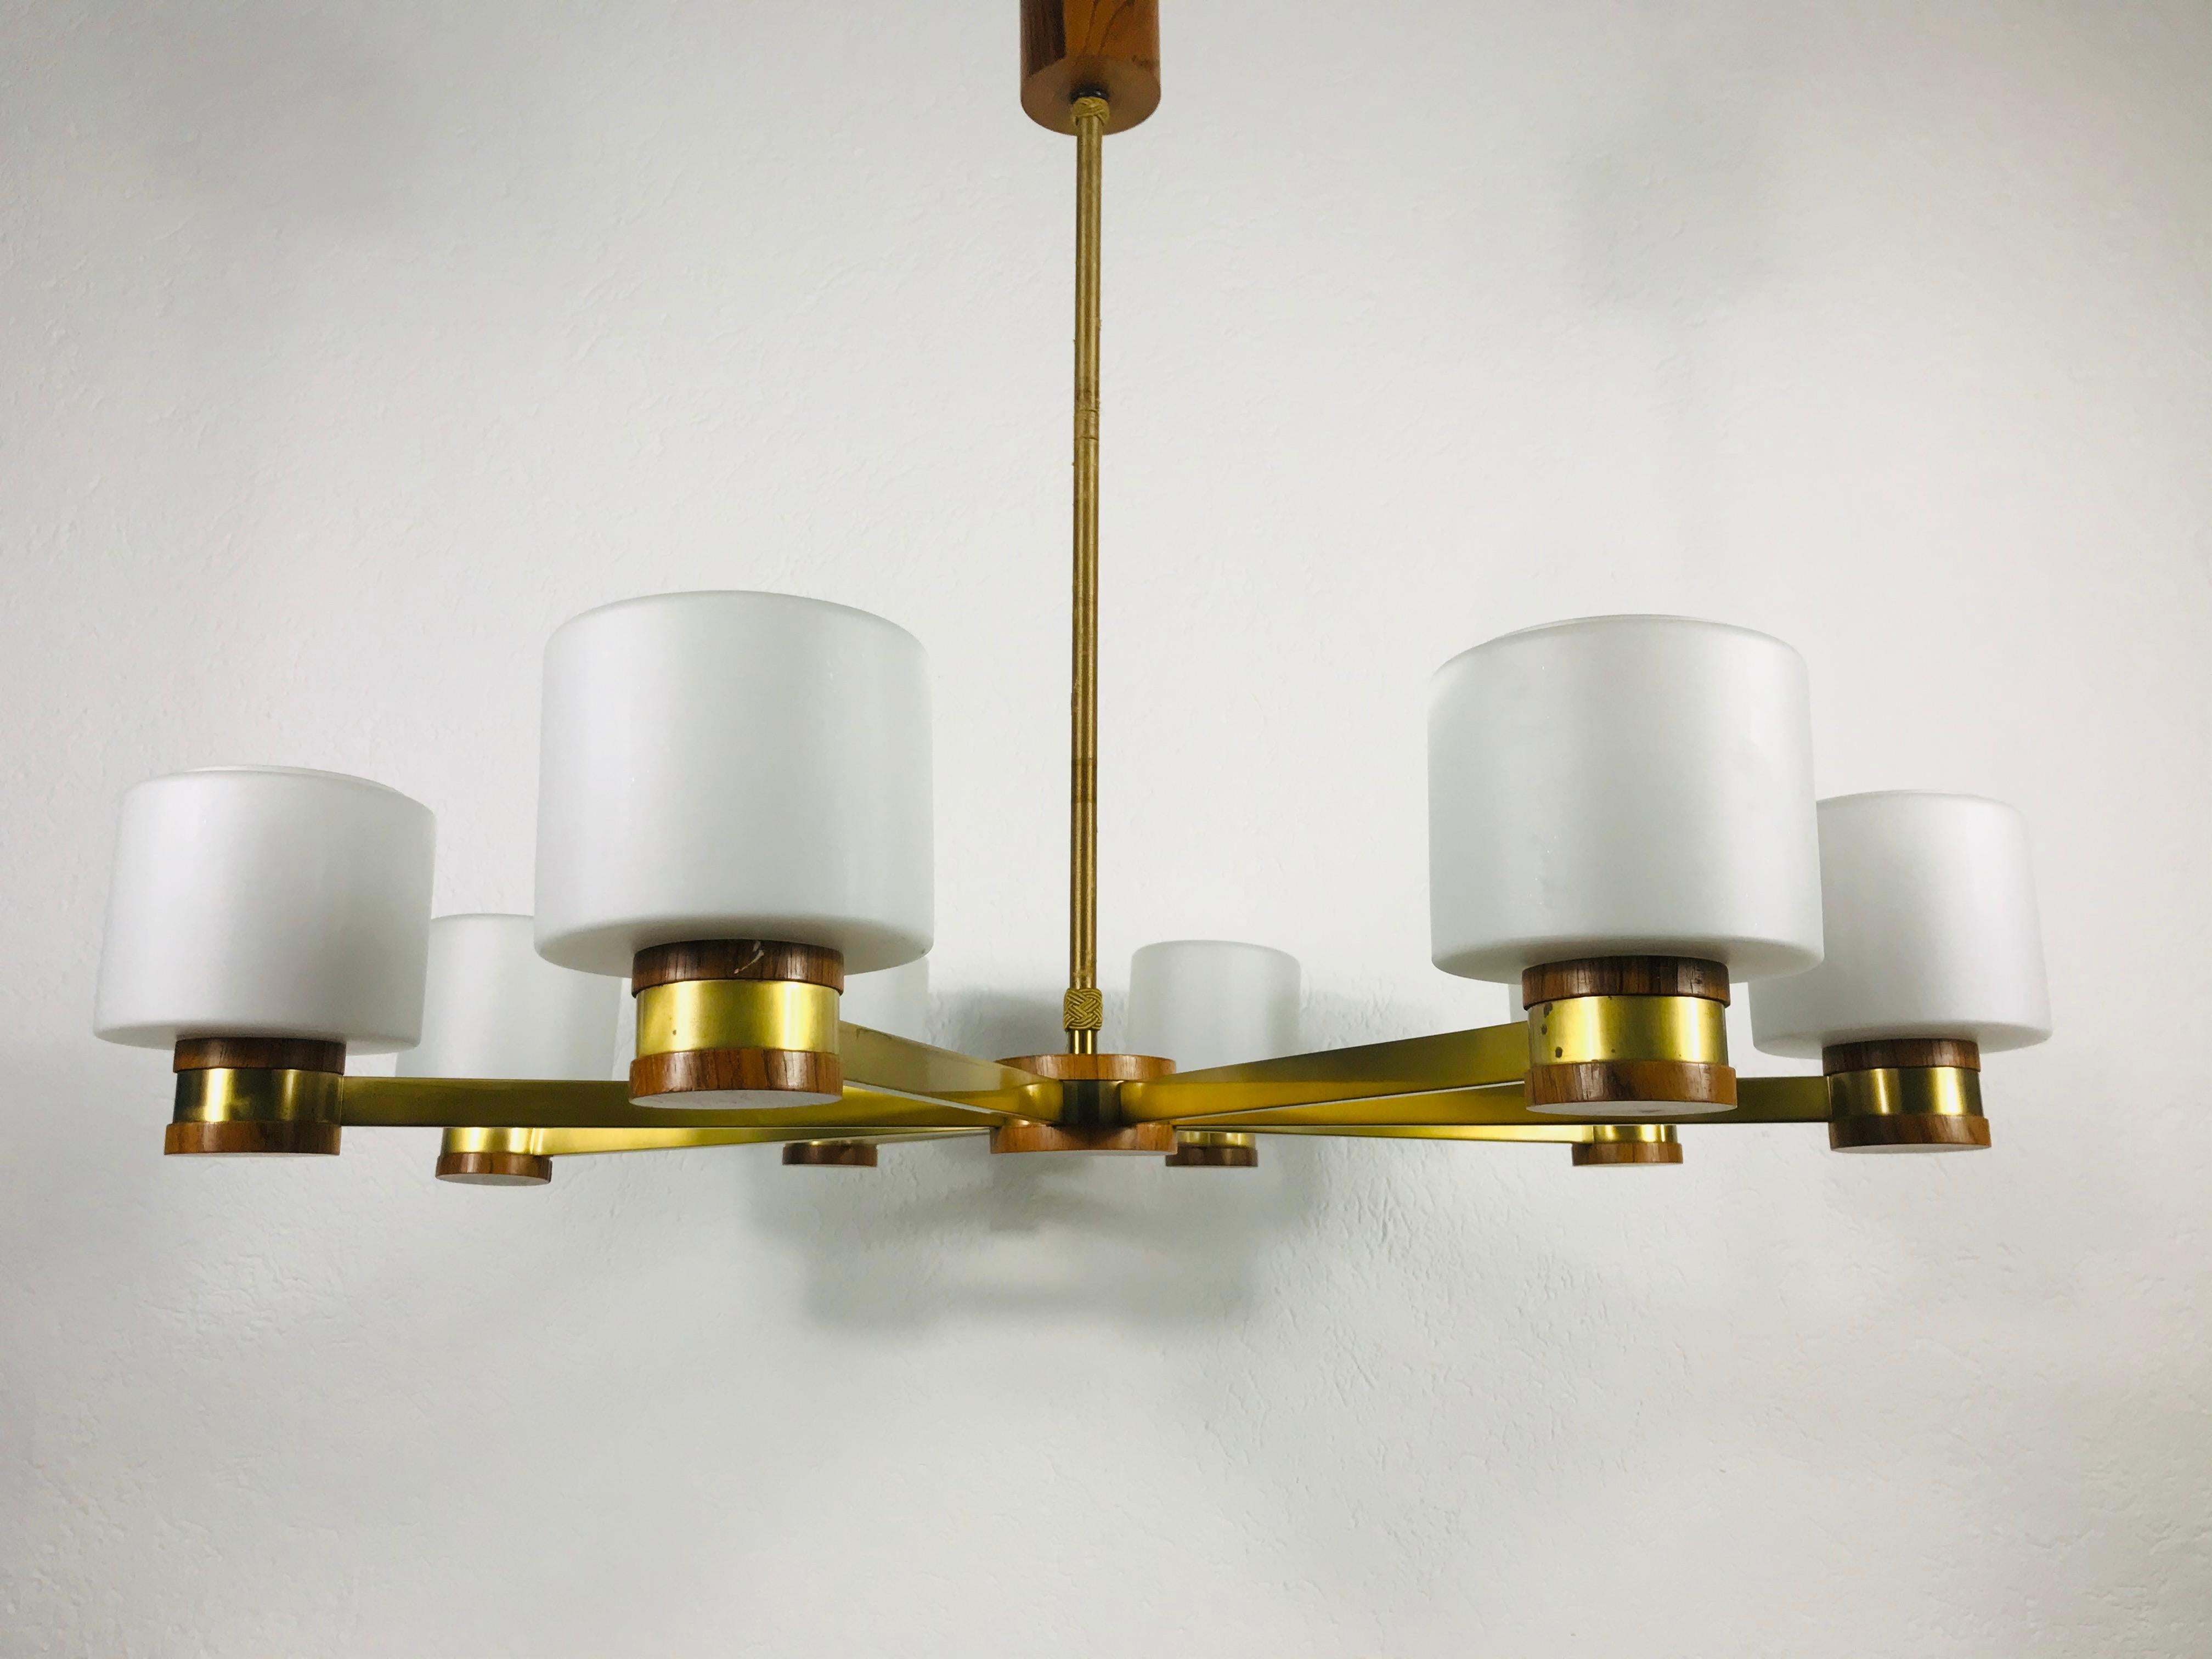 Mid-Century Modern chandelier made in the 1960s. It has eight brass arms, each with an opaline glass shade. The top and the bottom of the rope bar and the bottom of the glass shades are made of wood.

The light requires eight E27 light bulbs.